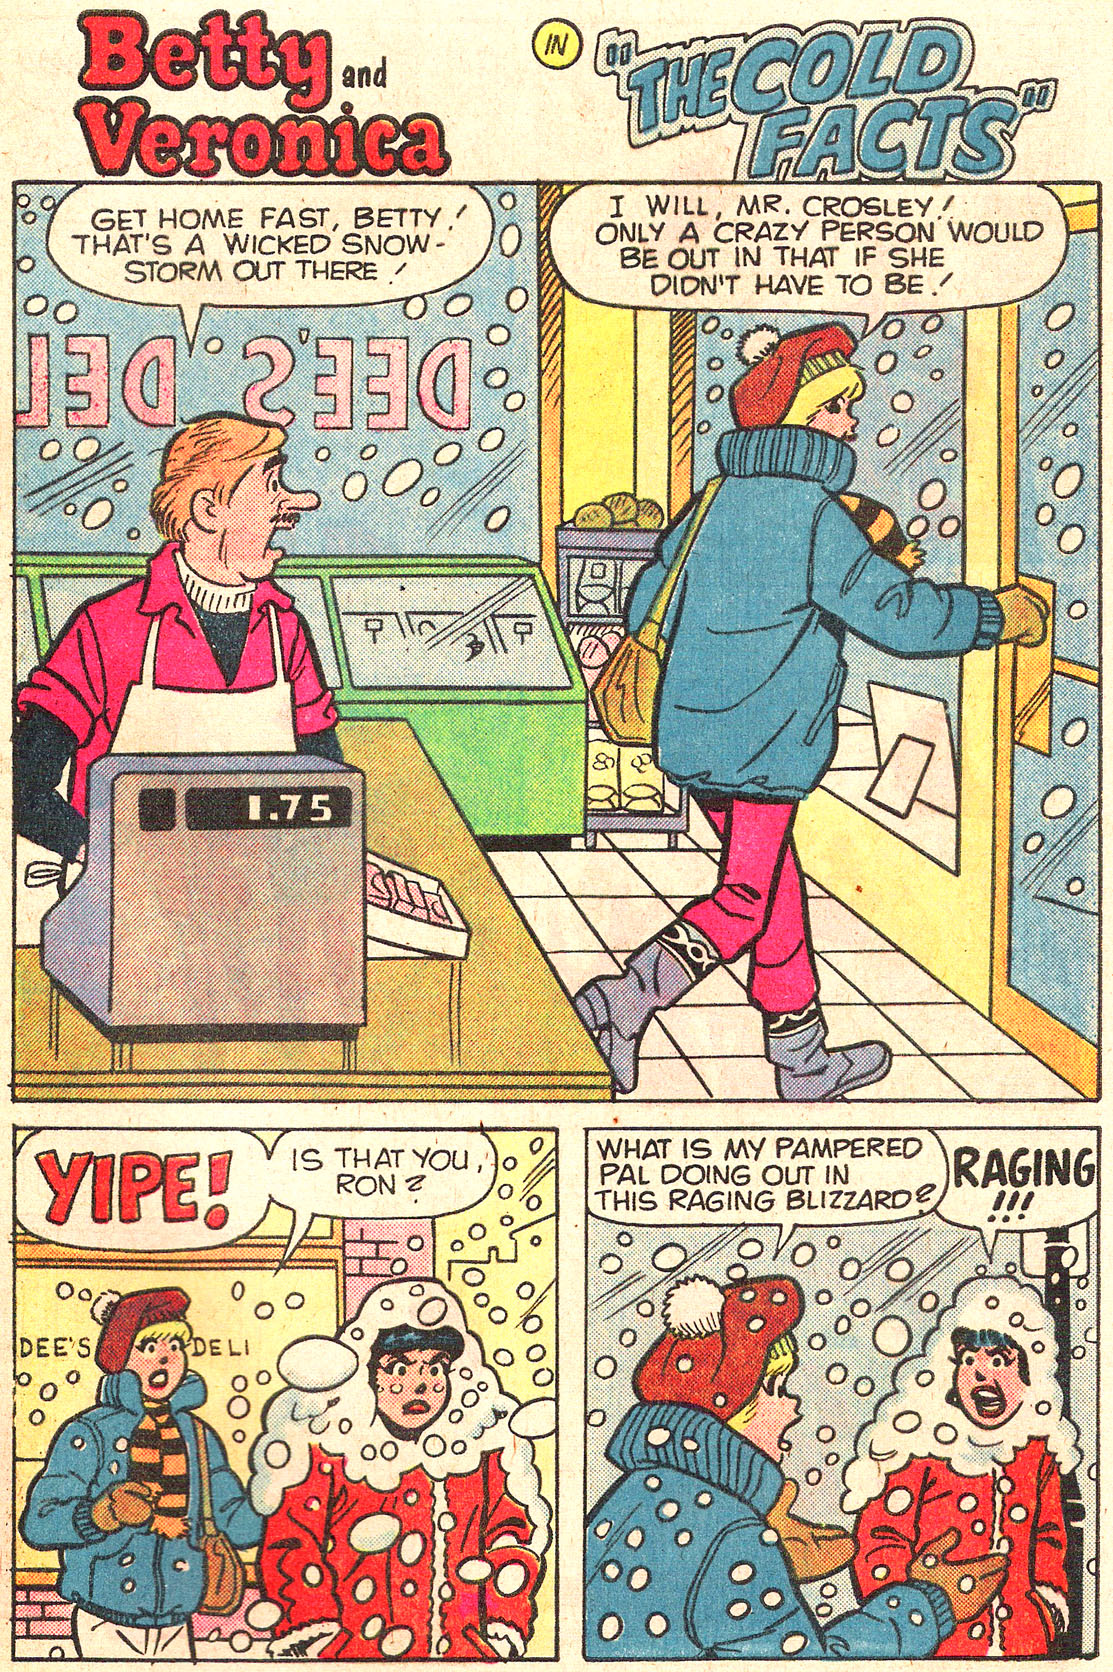 Read online Archie's Girls Betty and Veronica comic -  Issue #316 - 29